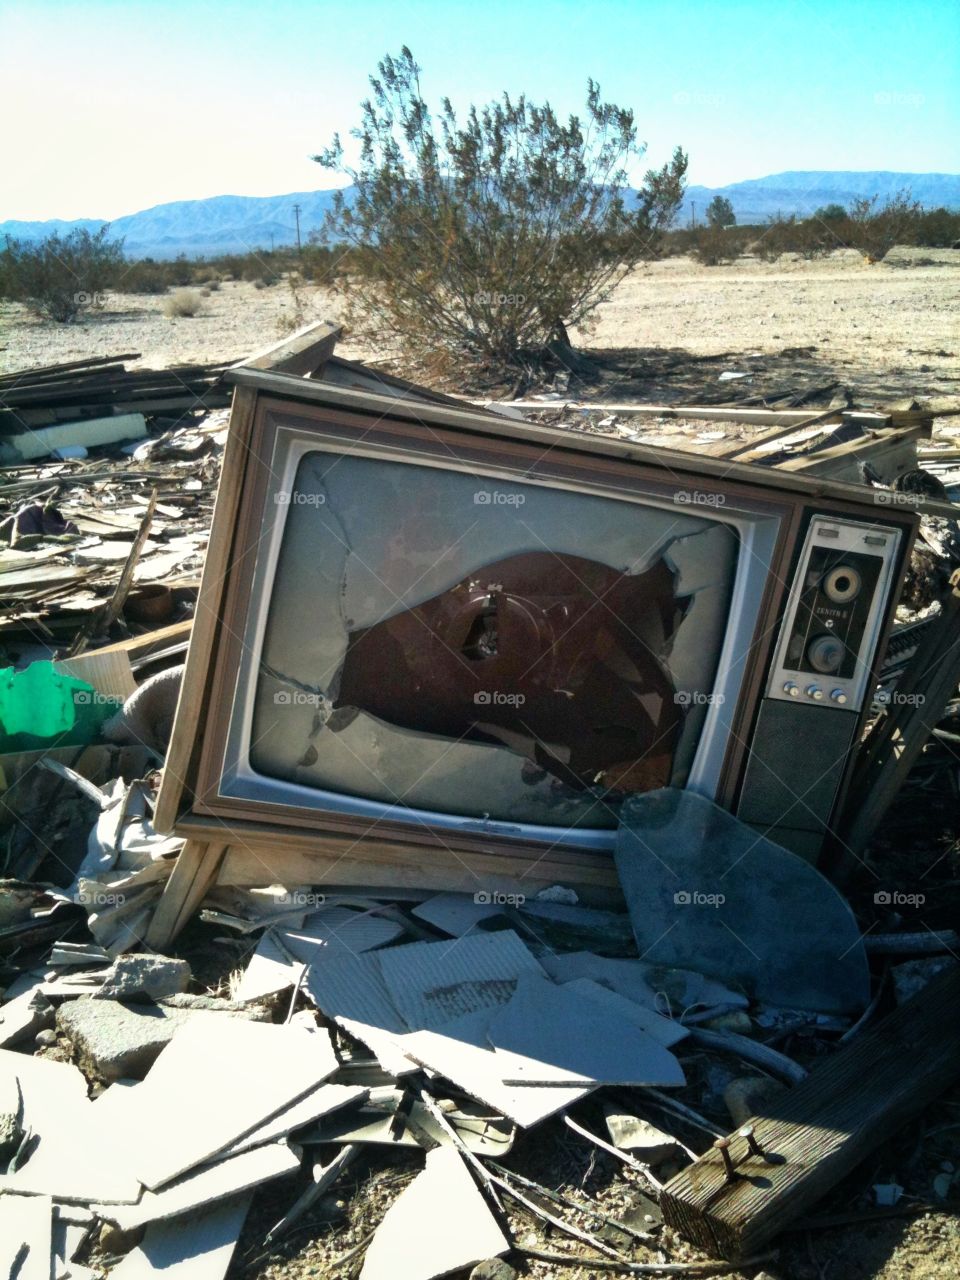 Smashed TV. An old smashed TV sits in the desert.